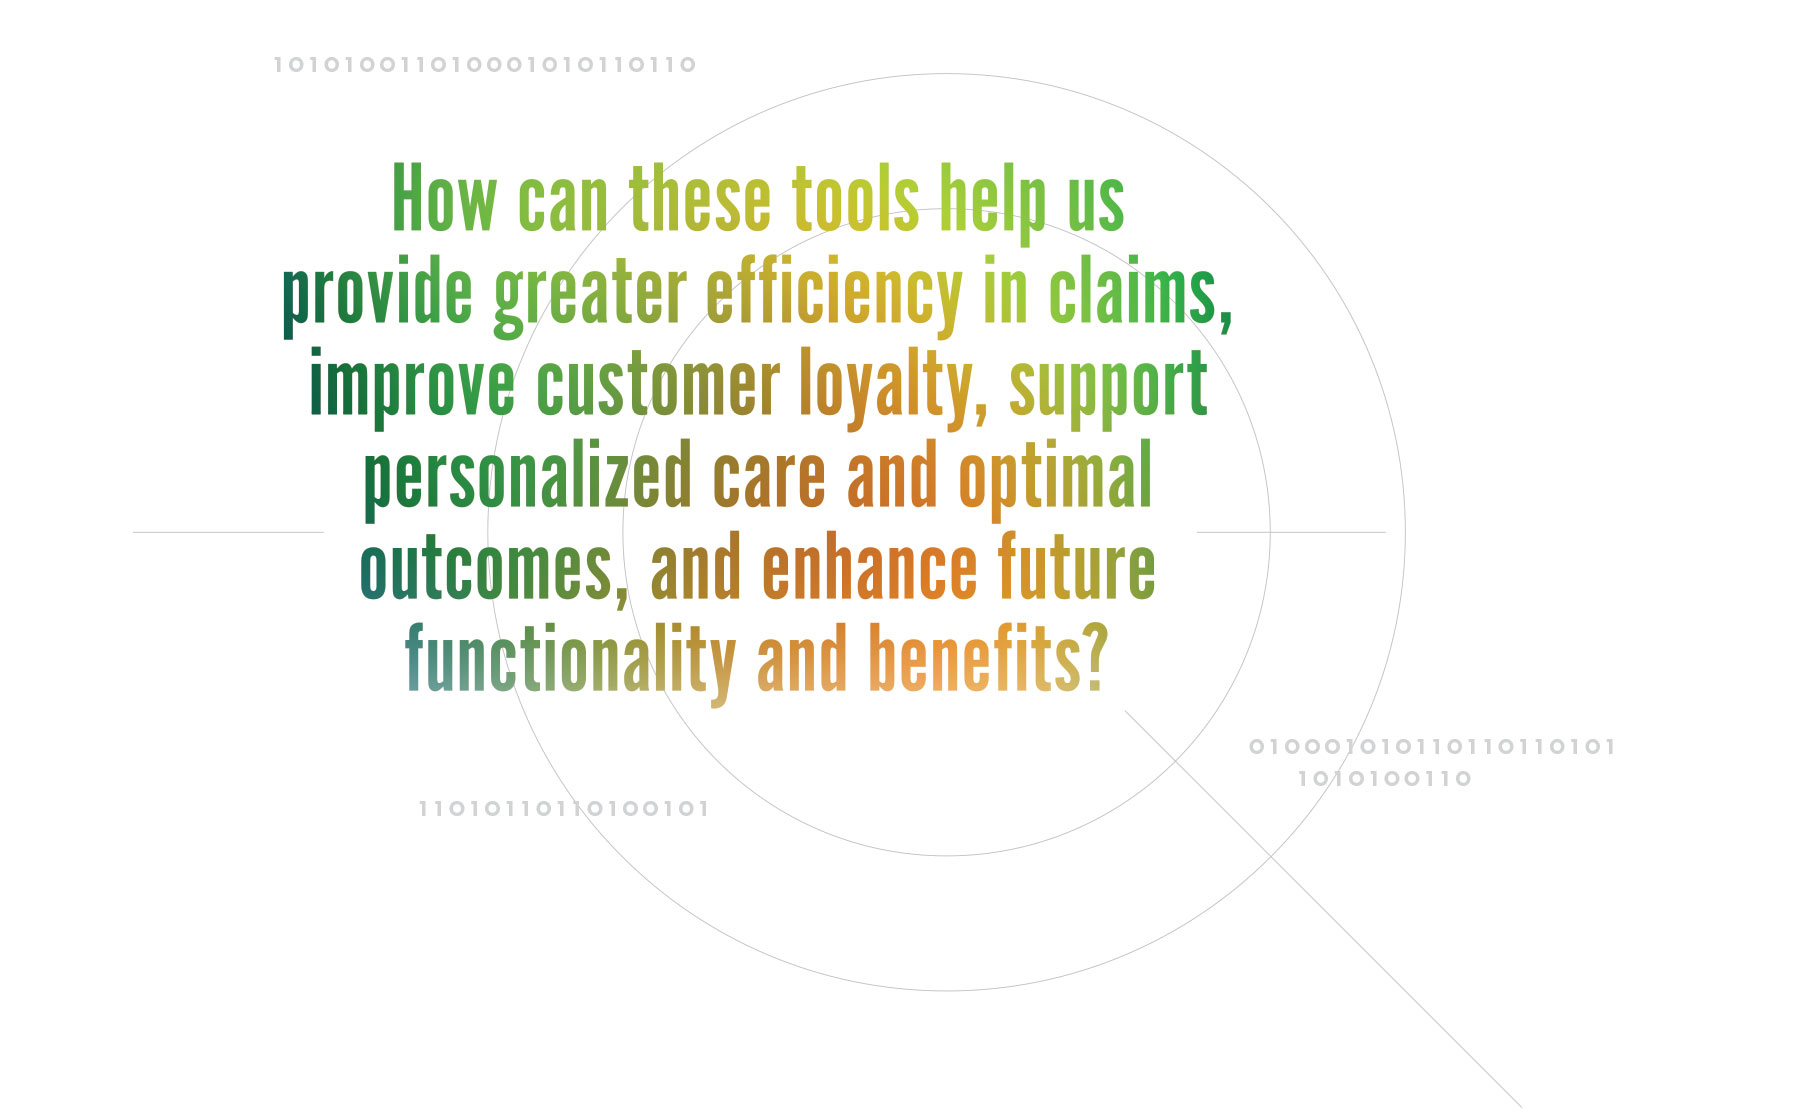 How can these tools help us provide greater efficiency in claims, imporve customer loyalty, support personalized care and optimal outcomes, and enhance future functionality and benefits?